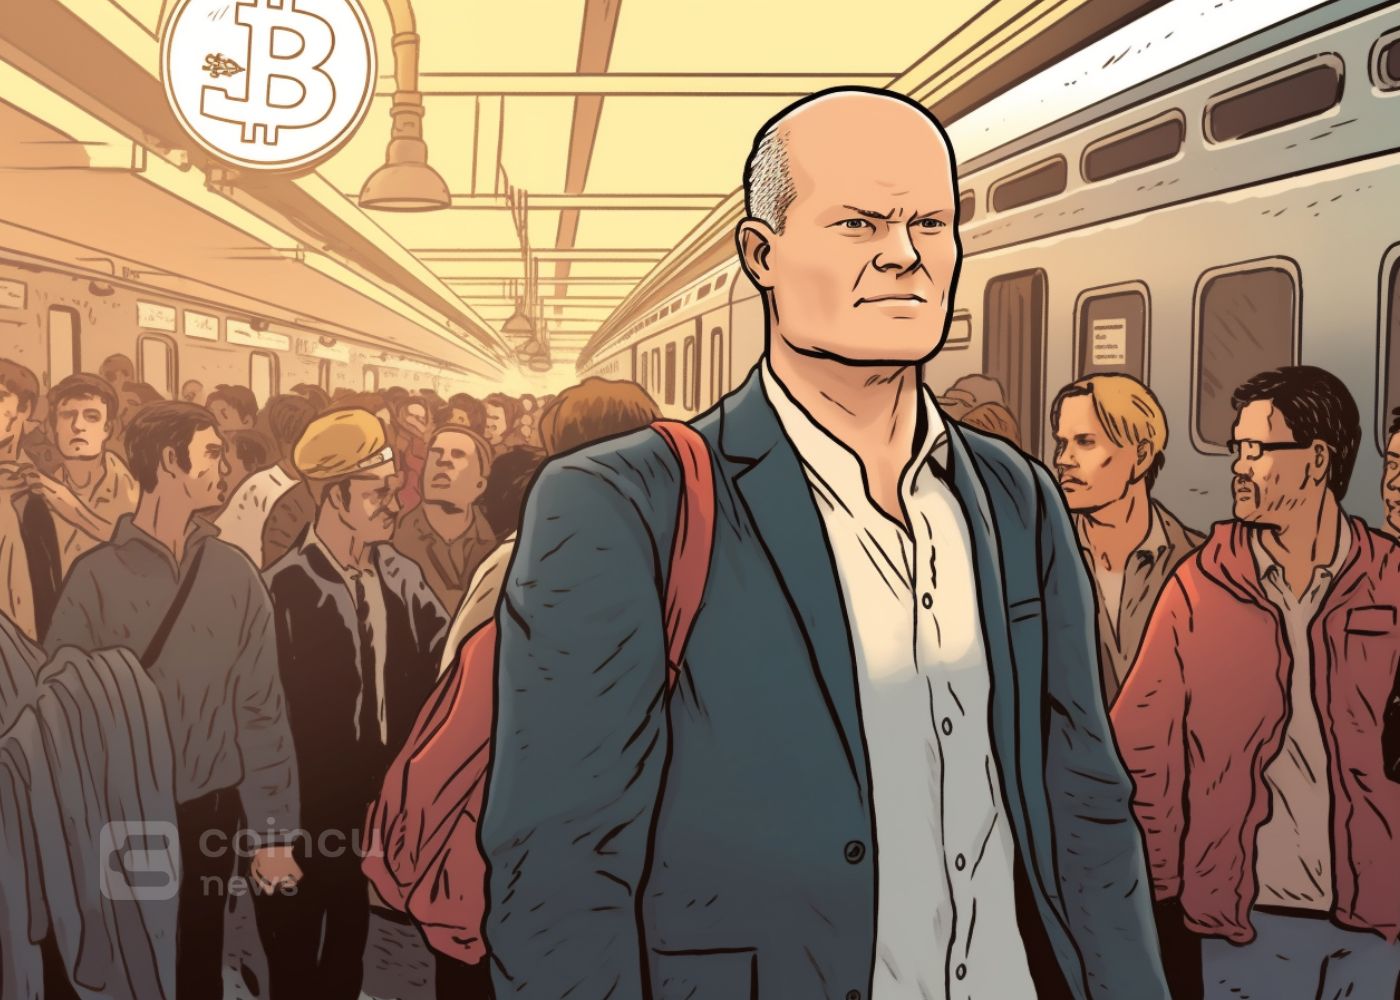 Bitcoin ETF Approval Expected In 4-6 Months, Says Galaxy CEO Mike Novogratz